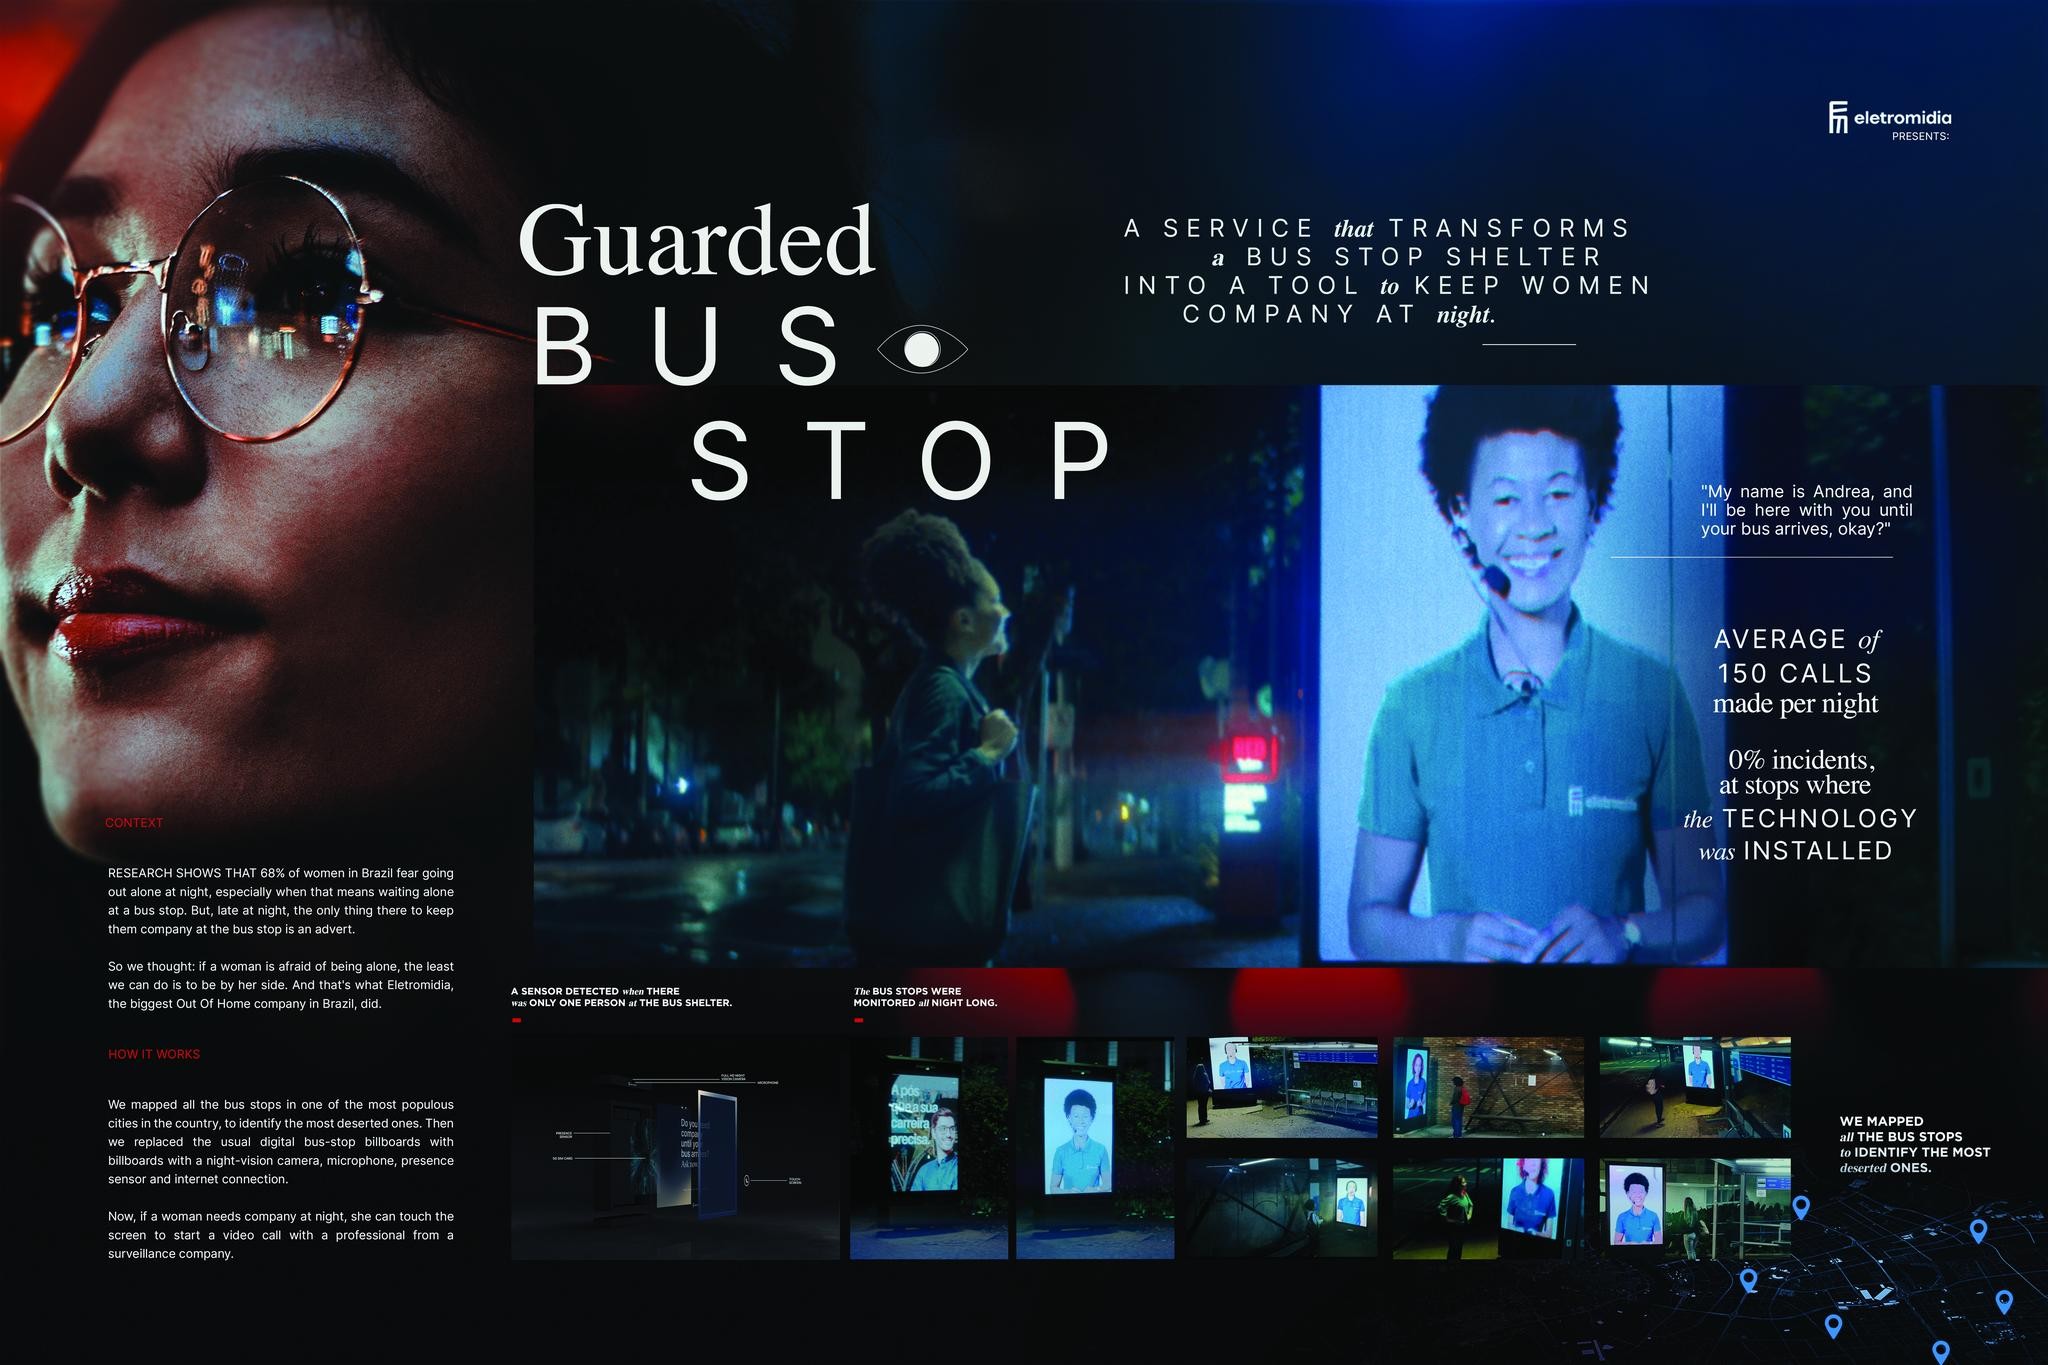 GUARDED BUS STOP